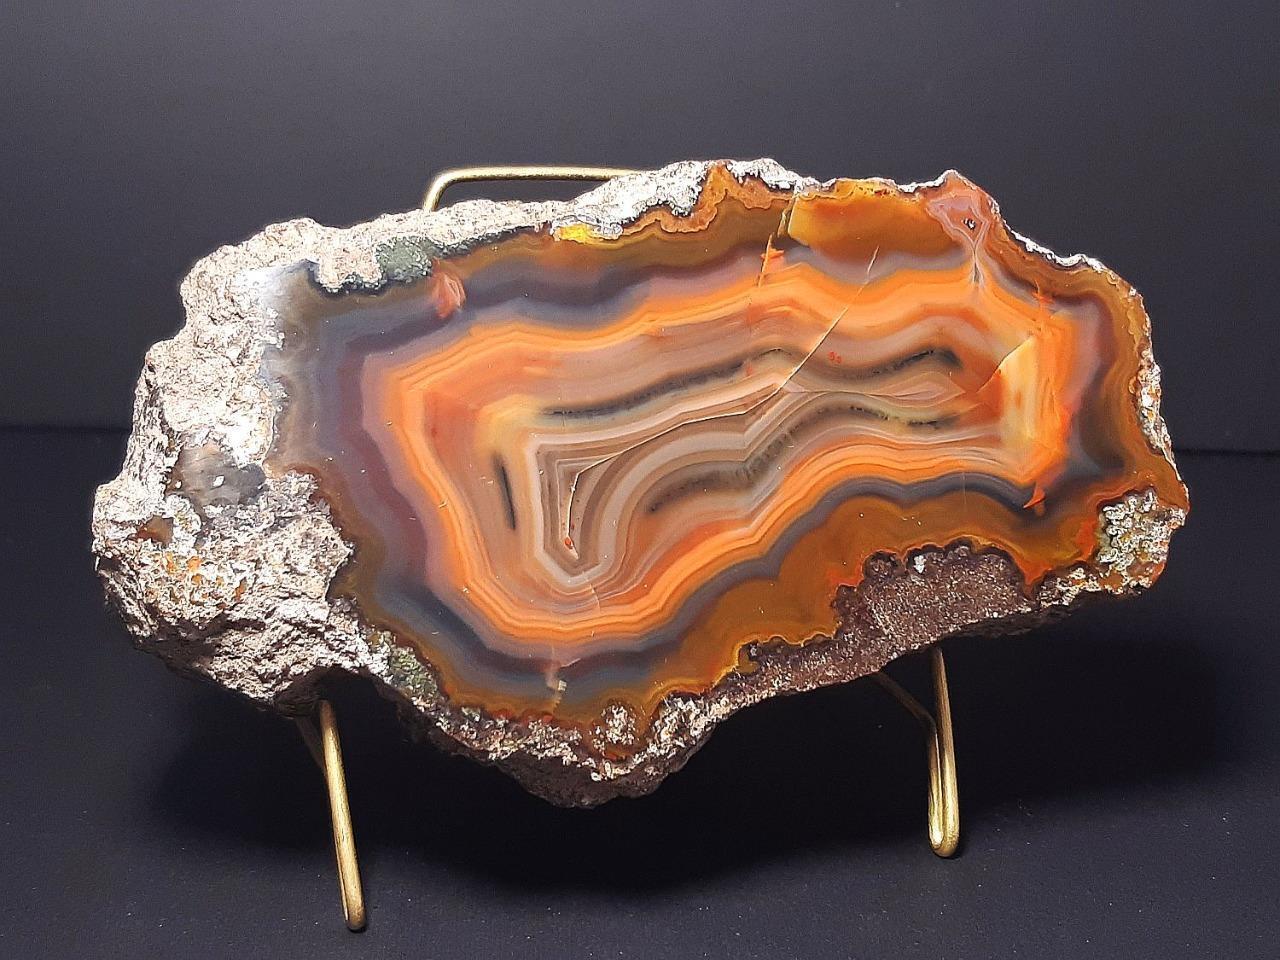 EXCEPTIONAL AGATE CONDOR SPECIMEN FROM ARGENTINA 649 Grams – 1.43 Pounds (C-438)